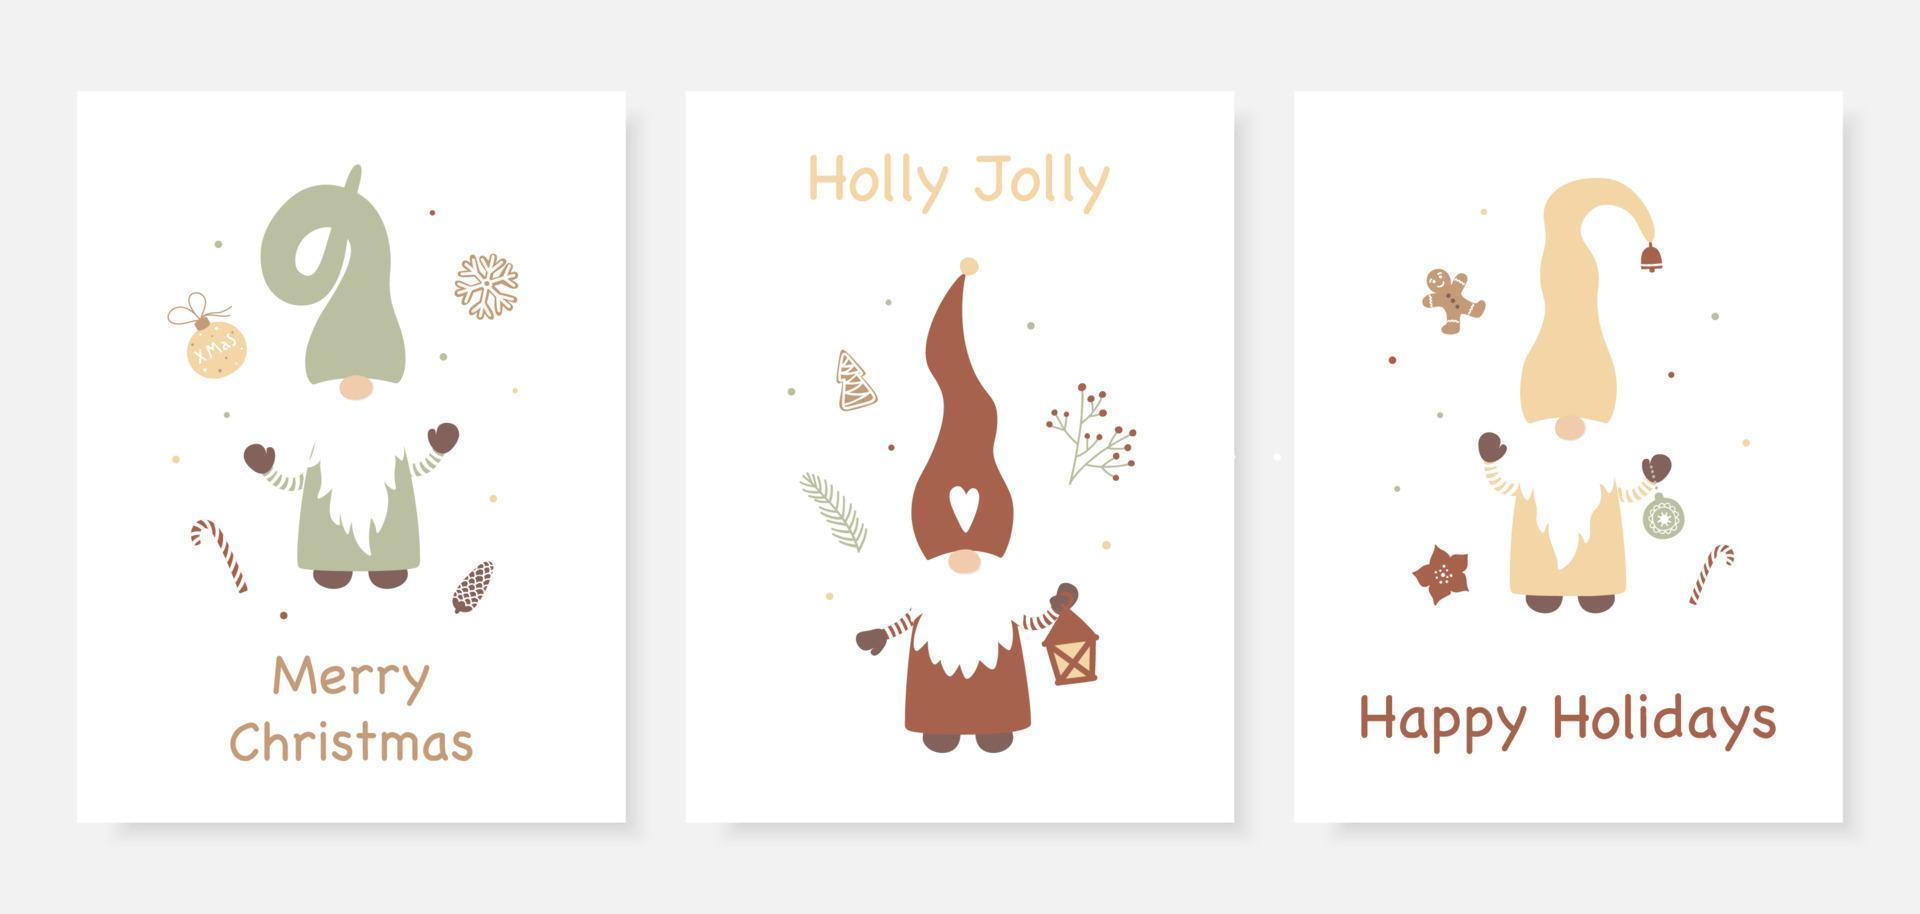 Season greetings. Christmas card set with cute little Gnomes. vector